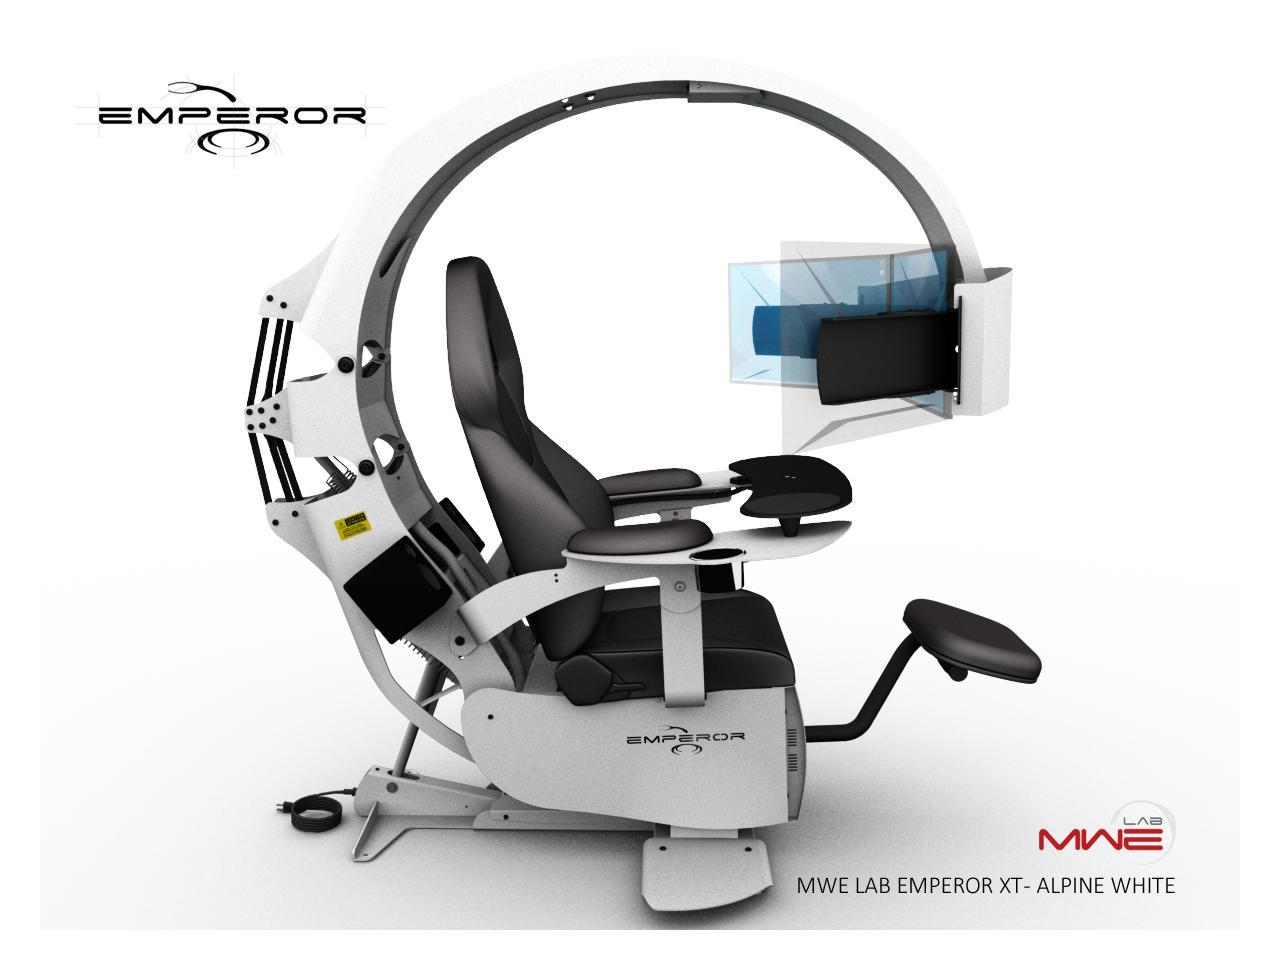 Mwe Lab Emperor Xt Motorised Ergonomic Workstation Gaming Chair Alpine White Integrated Sound System Pre Wired To Support Up To 3x30 Monitors Newegg Com